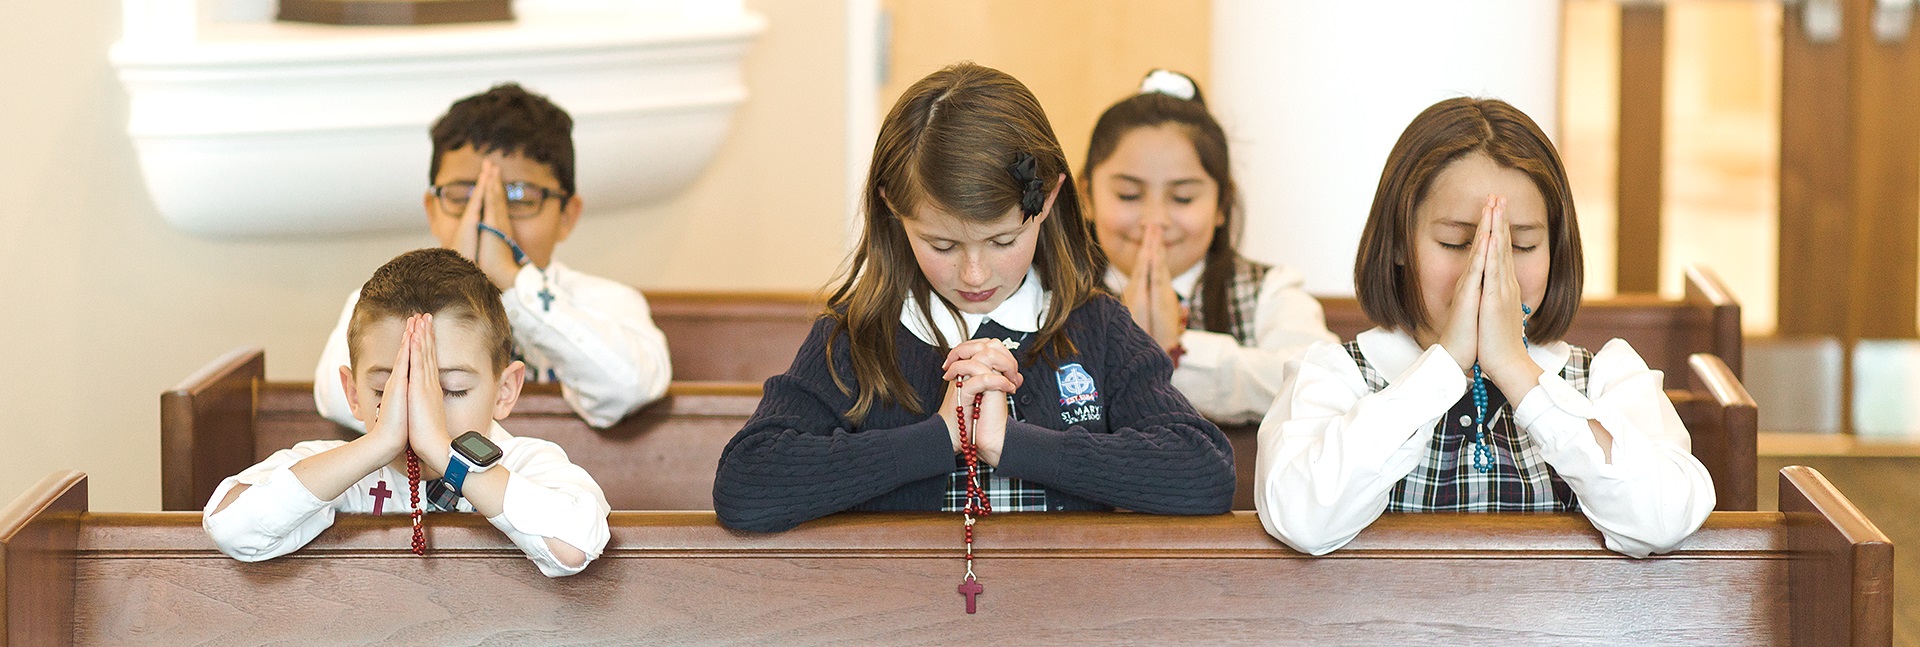 Diverse group of students praying in pews while wearing Catholic school uniforms